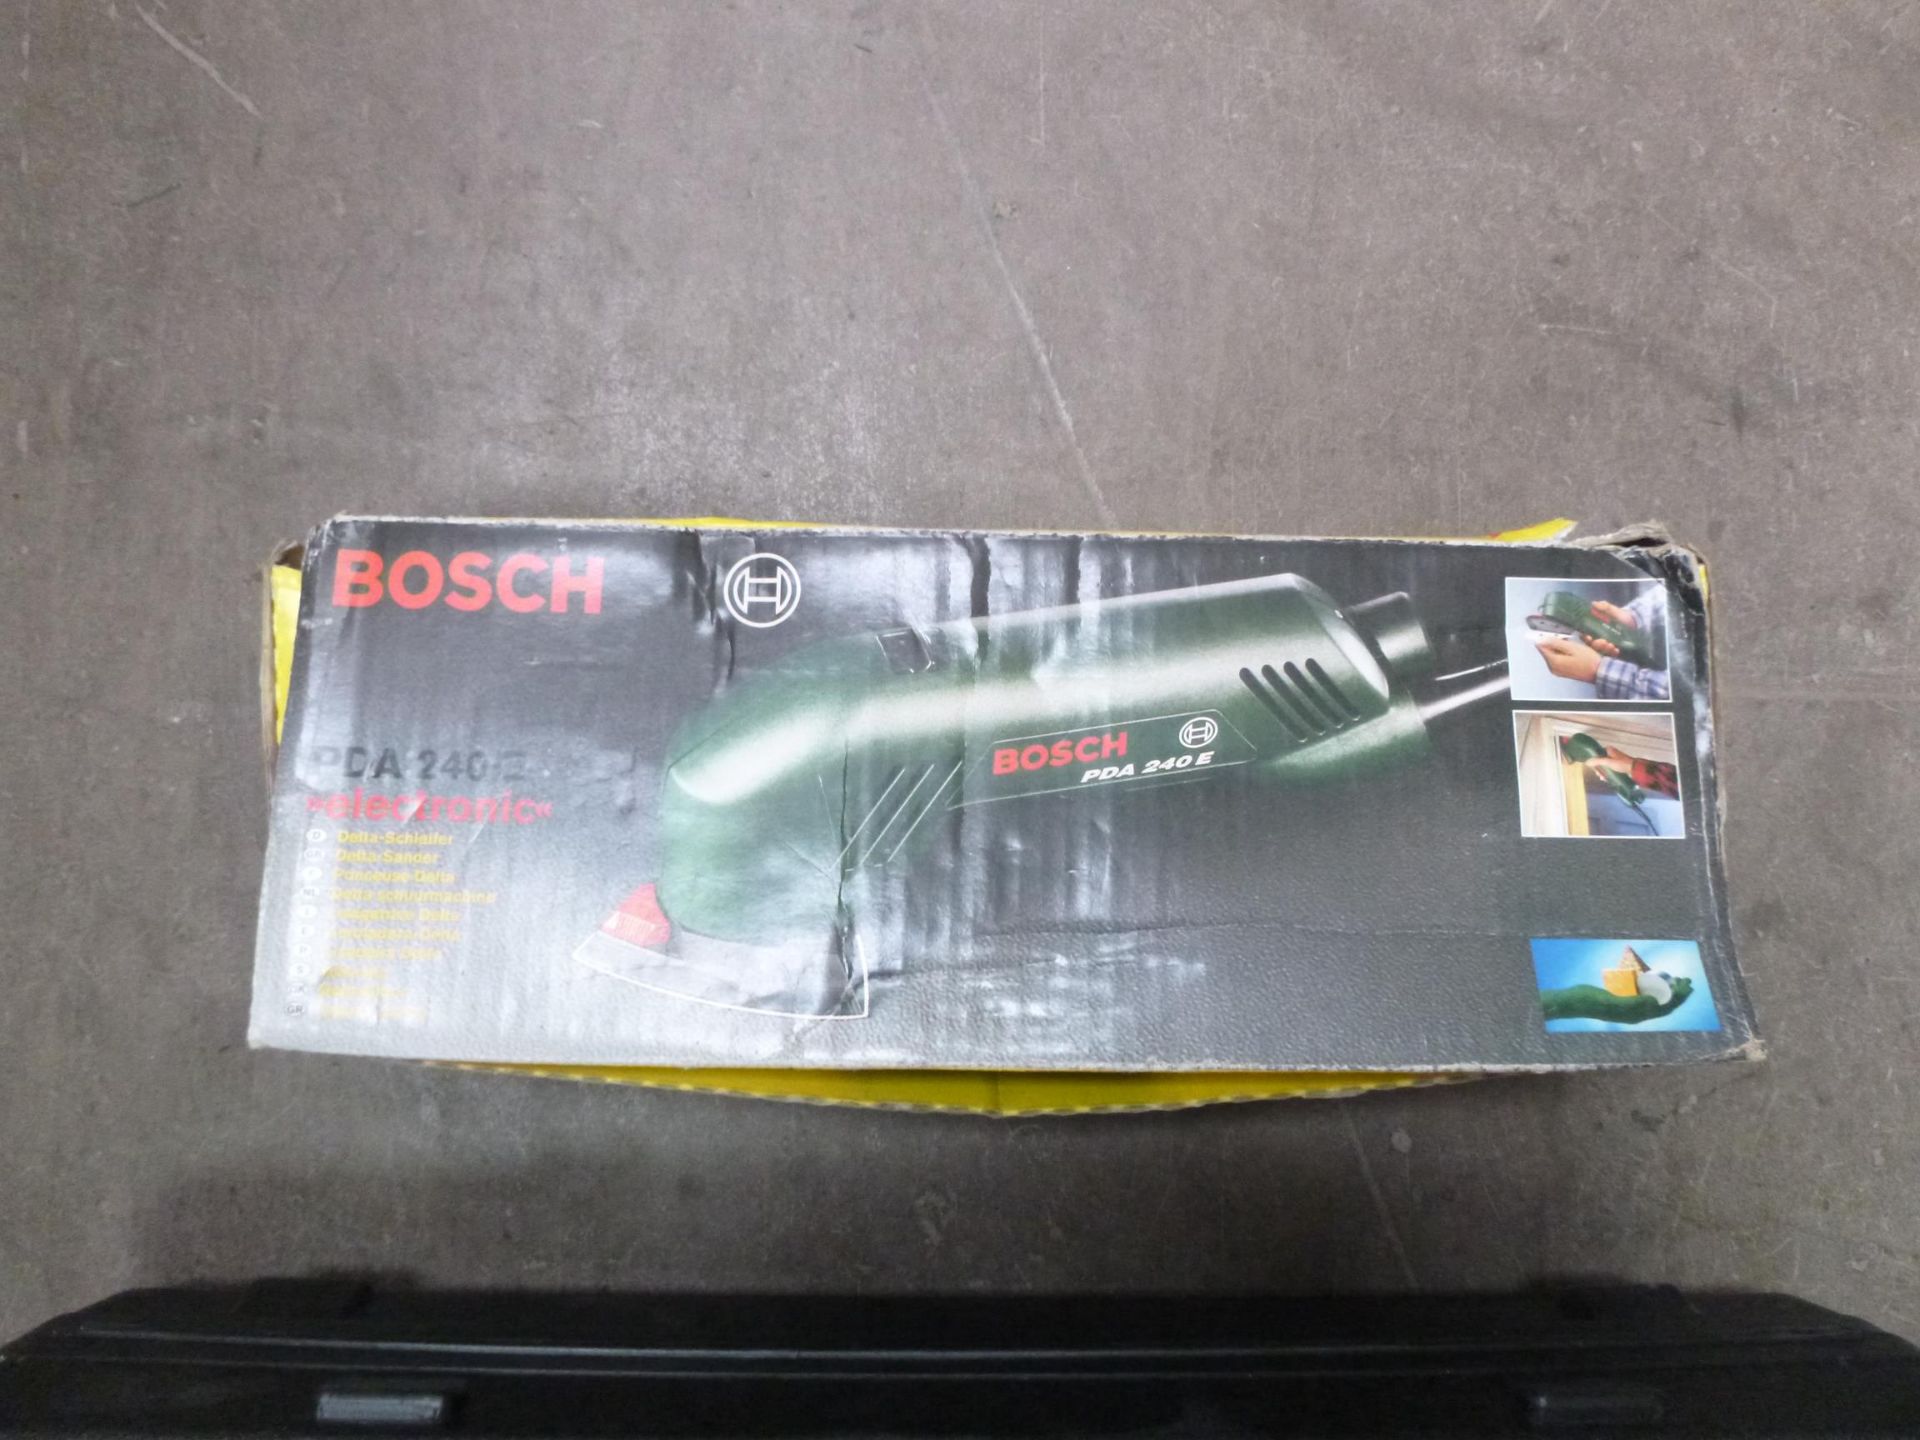 A Bosch PDA 240E Detail Sander together with a Black and Decker KD791 705W Hammer Drill - Image 2 of 3